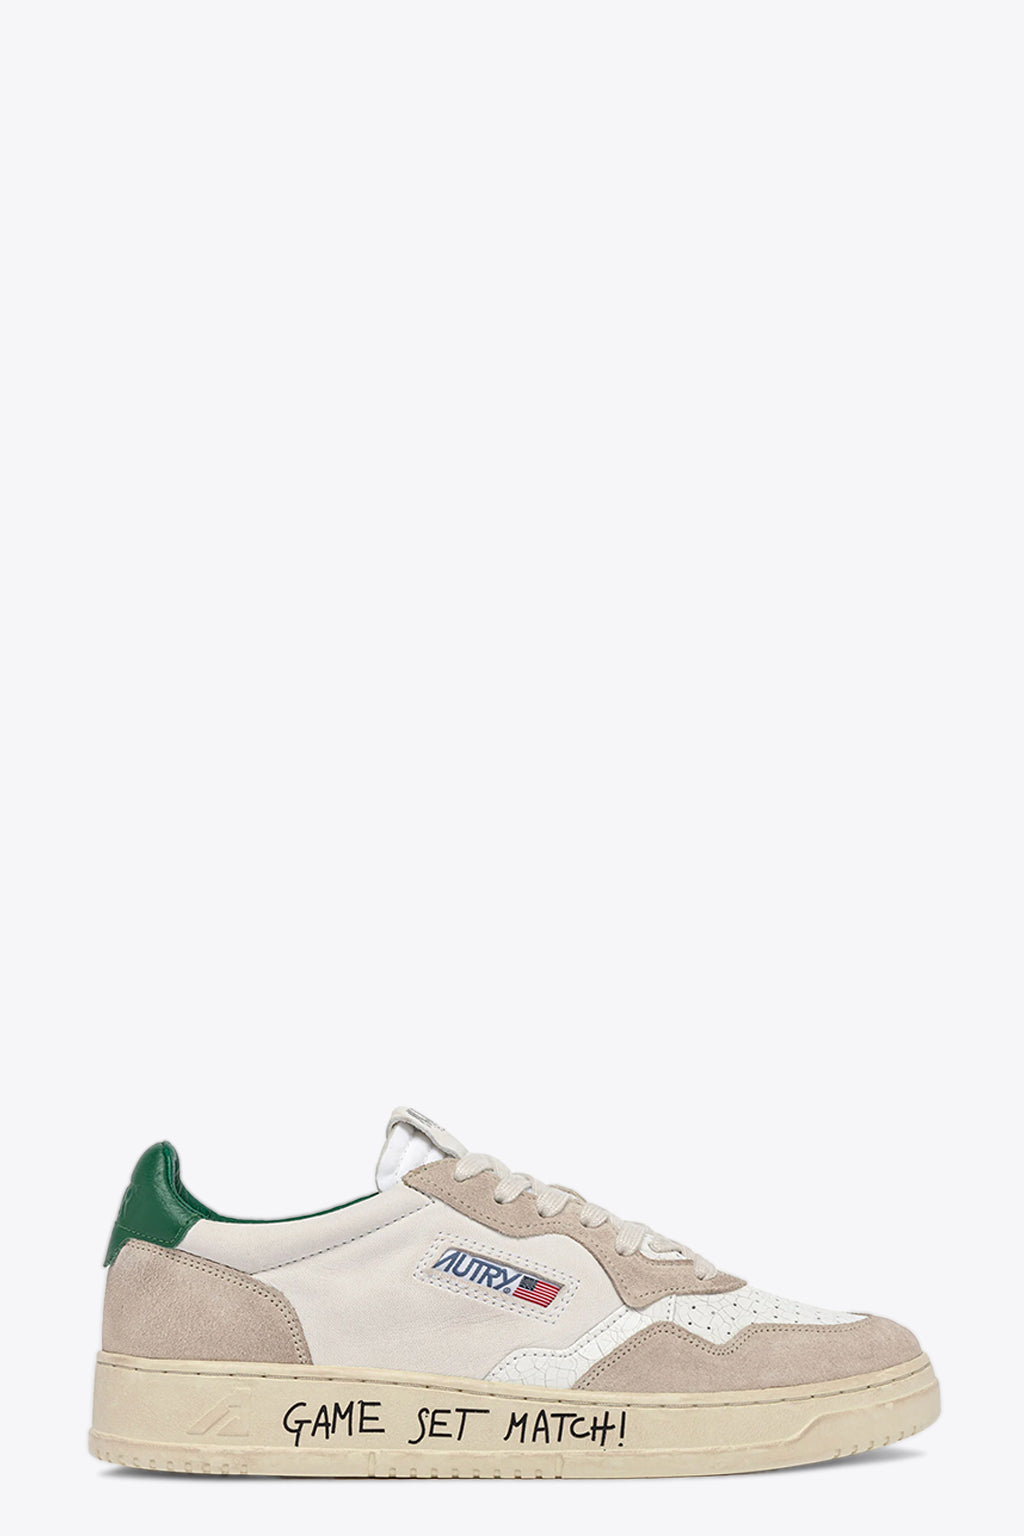 alt-image__White-leather-and-suede-low-sneaker-with-slogan---Medalist